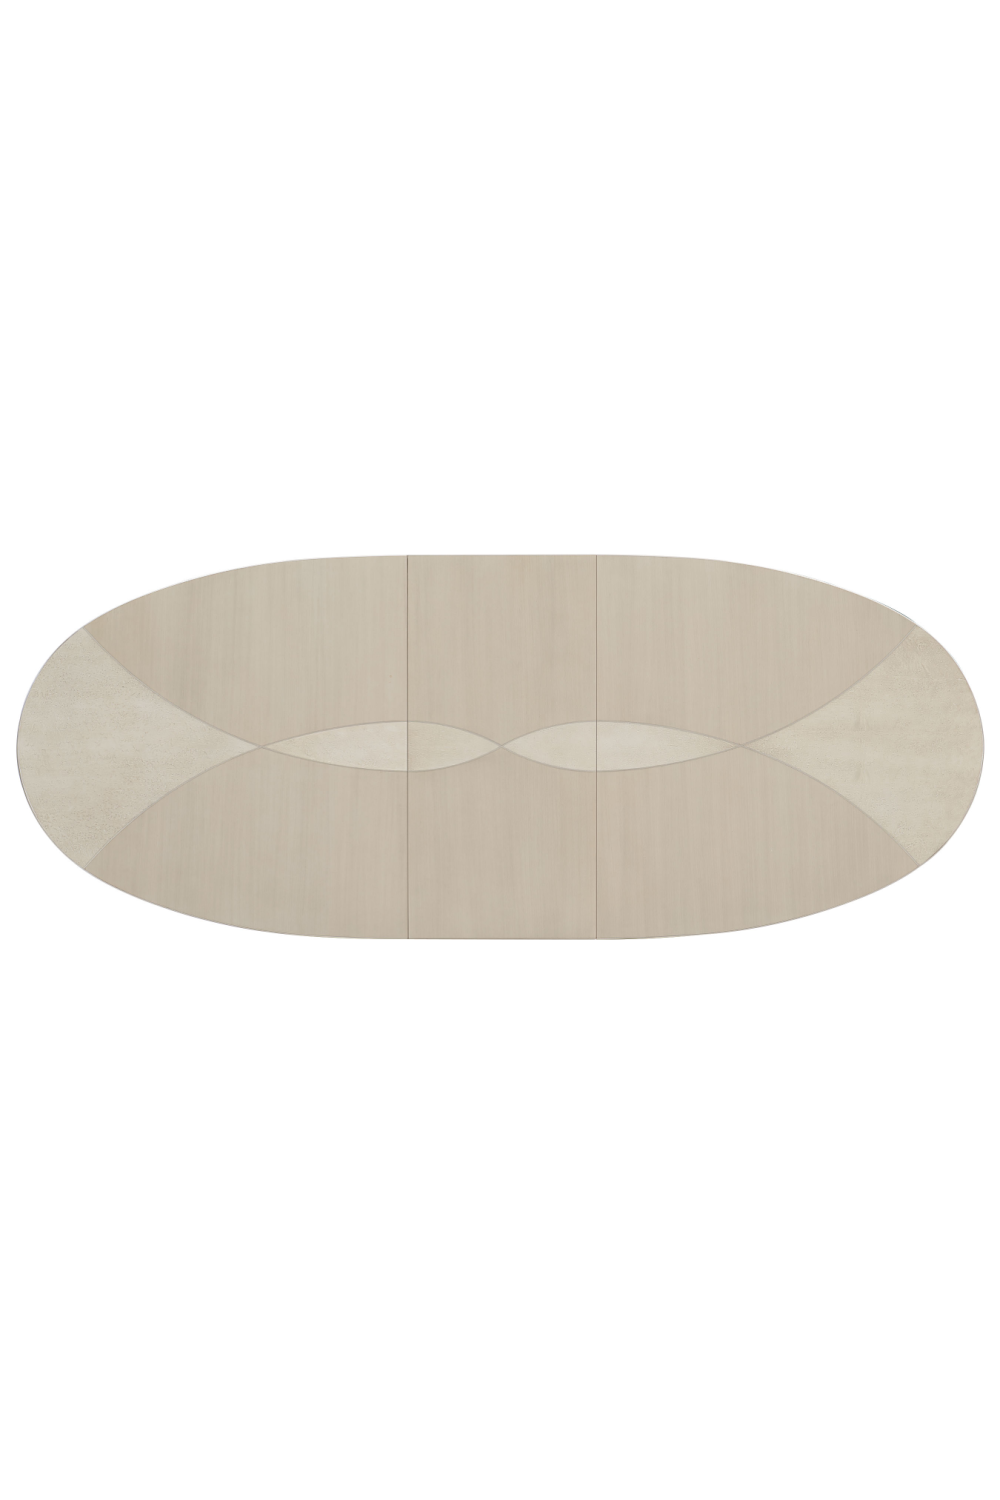 Oval Silver Dining Table | Caracole The Source | Oroa.com